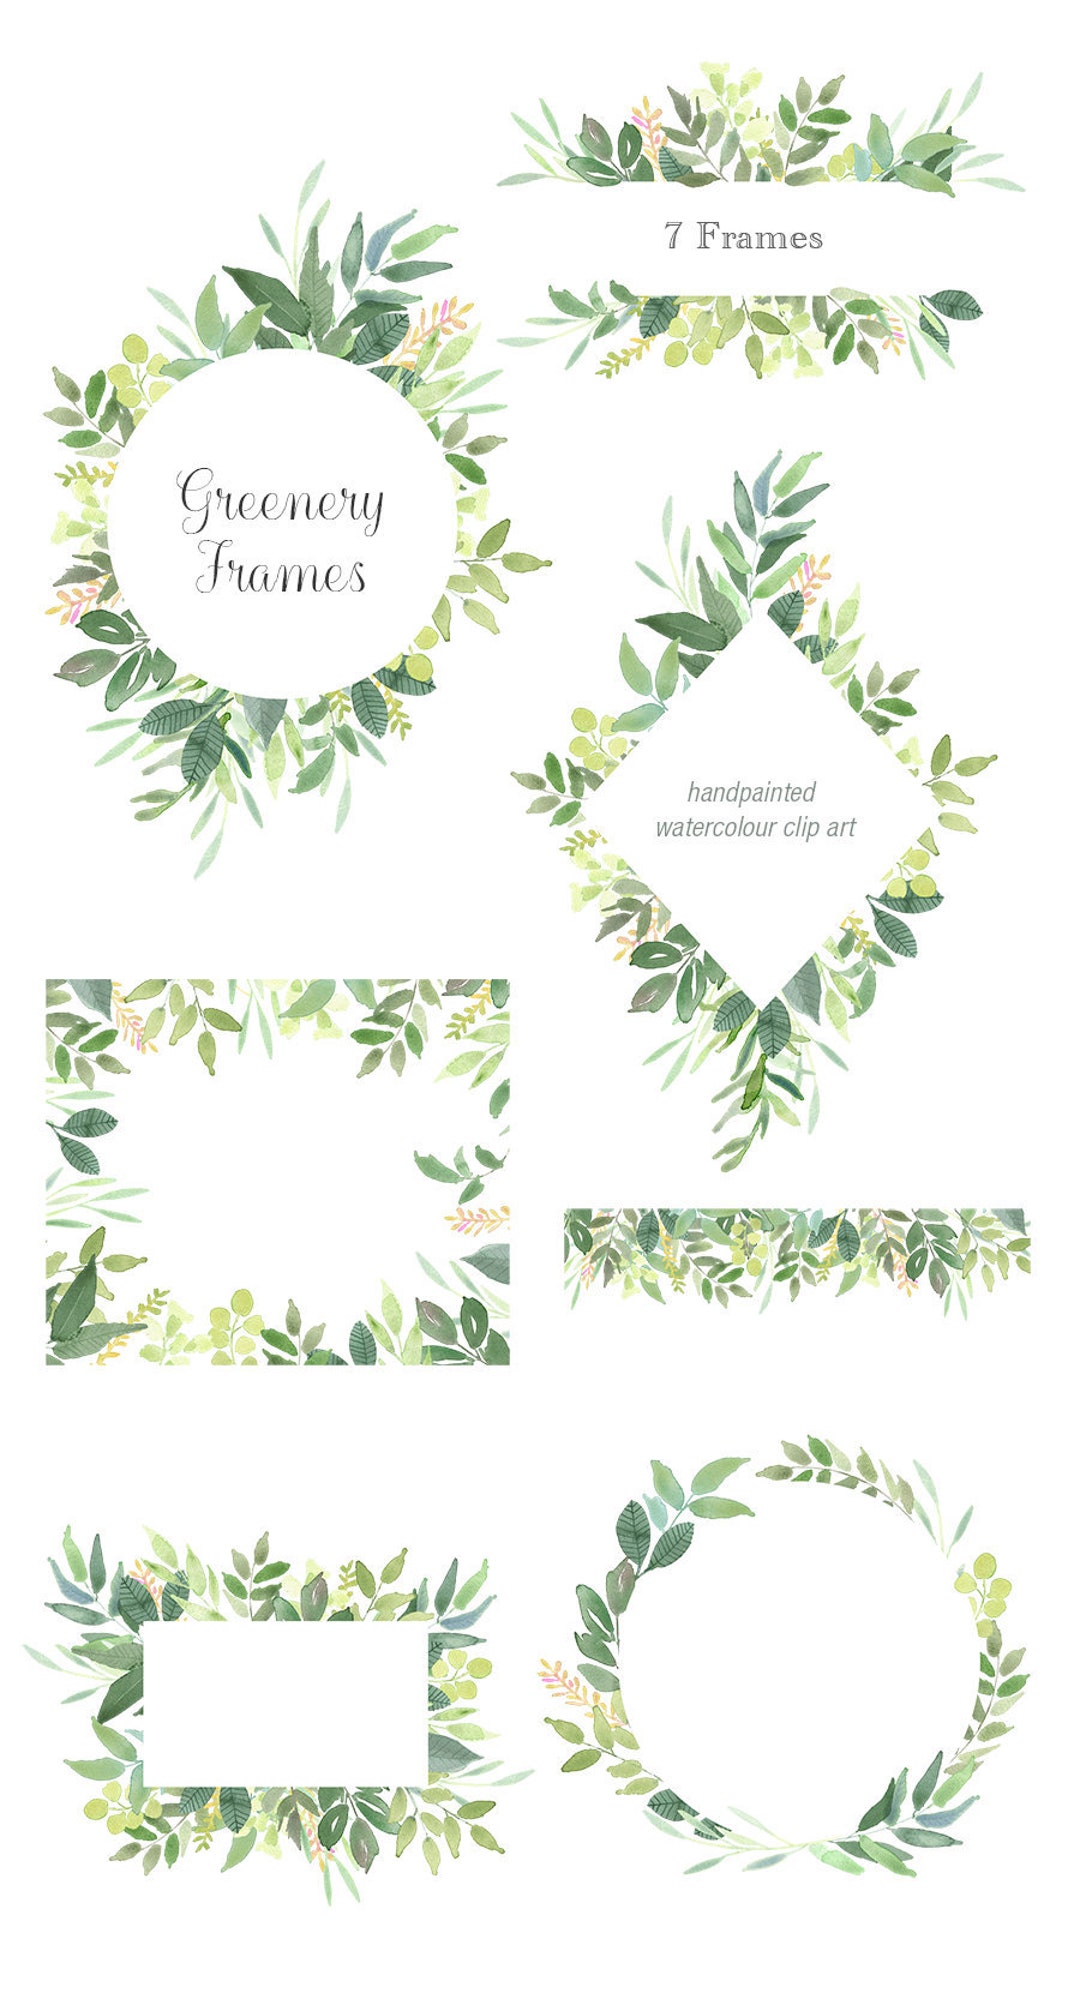 Green Leaves Frames Foliage Clipart, Greenery Wedding Invites, Leaf Clip Art,  Watercolor Clipart,  Branding, Scrapbooking, Leaf PNG -  Canada